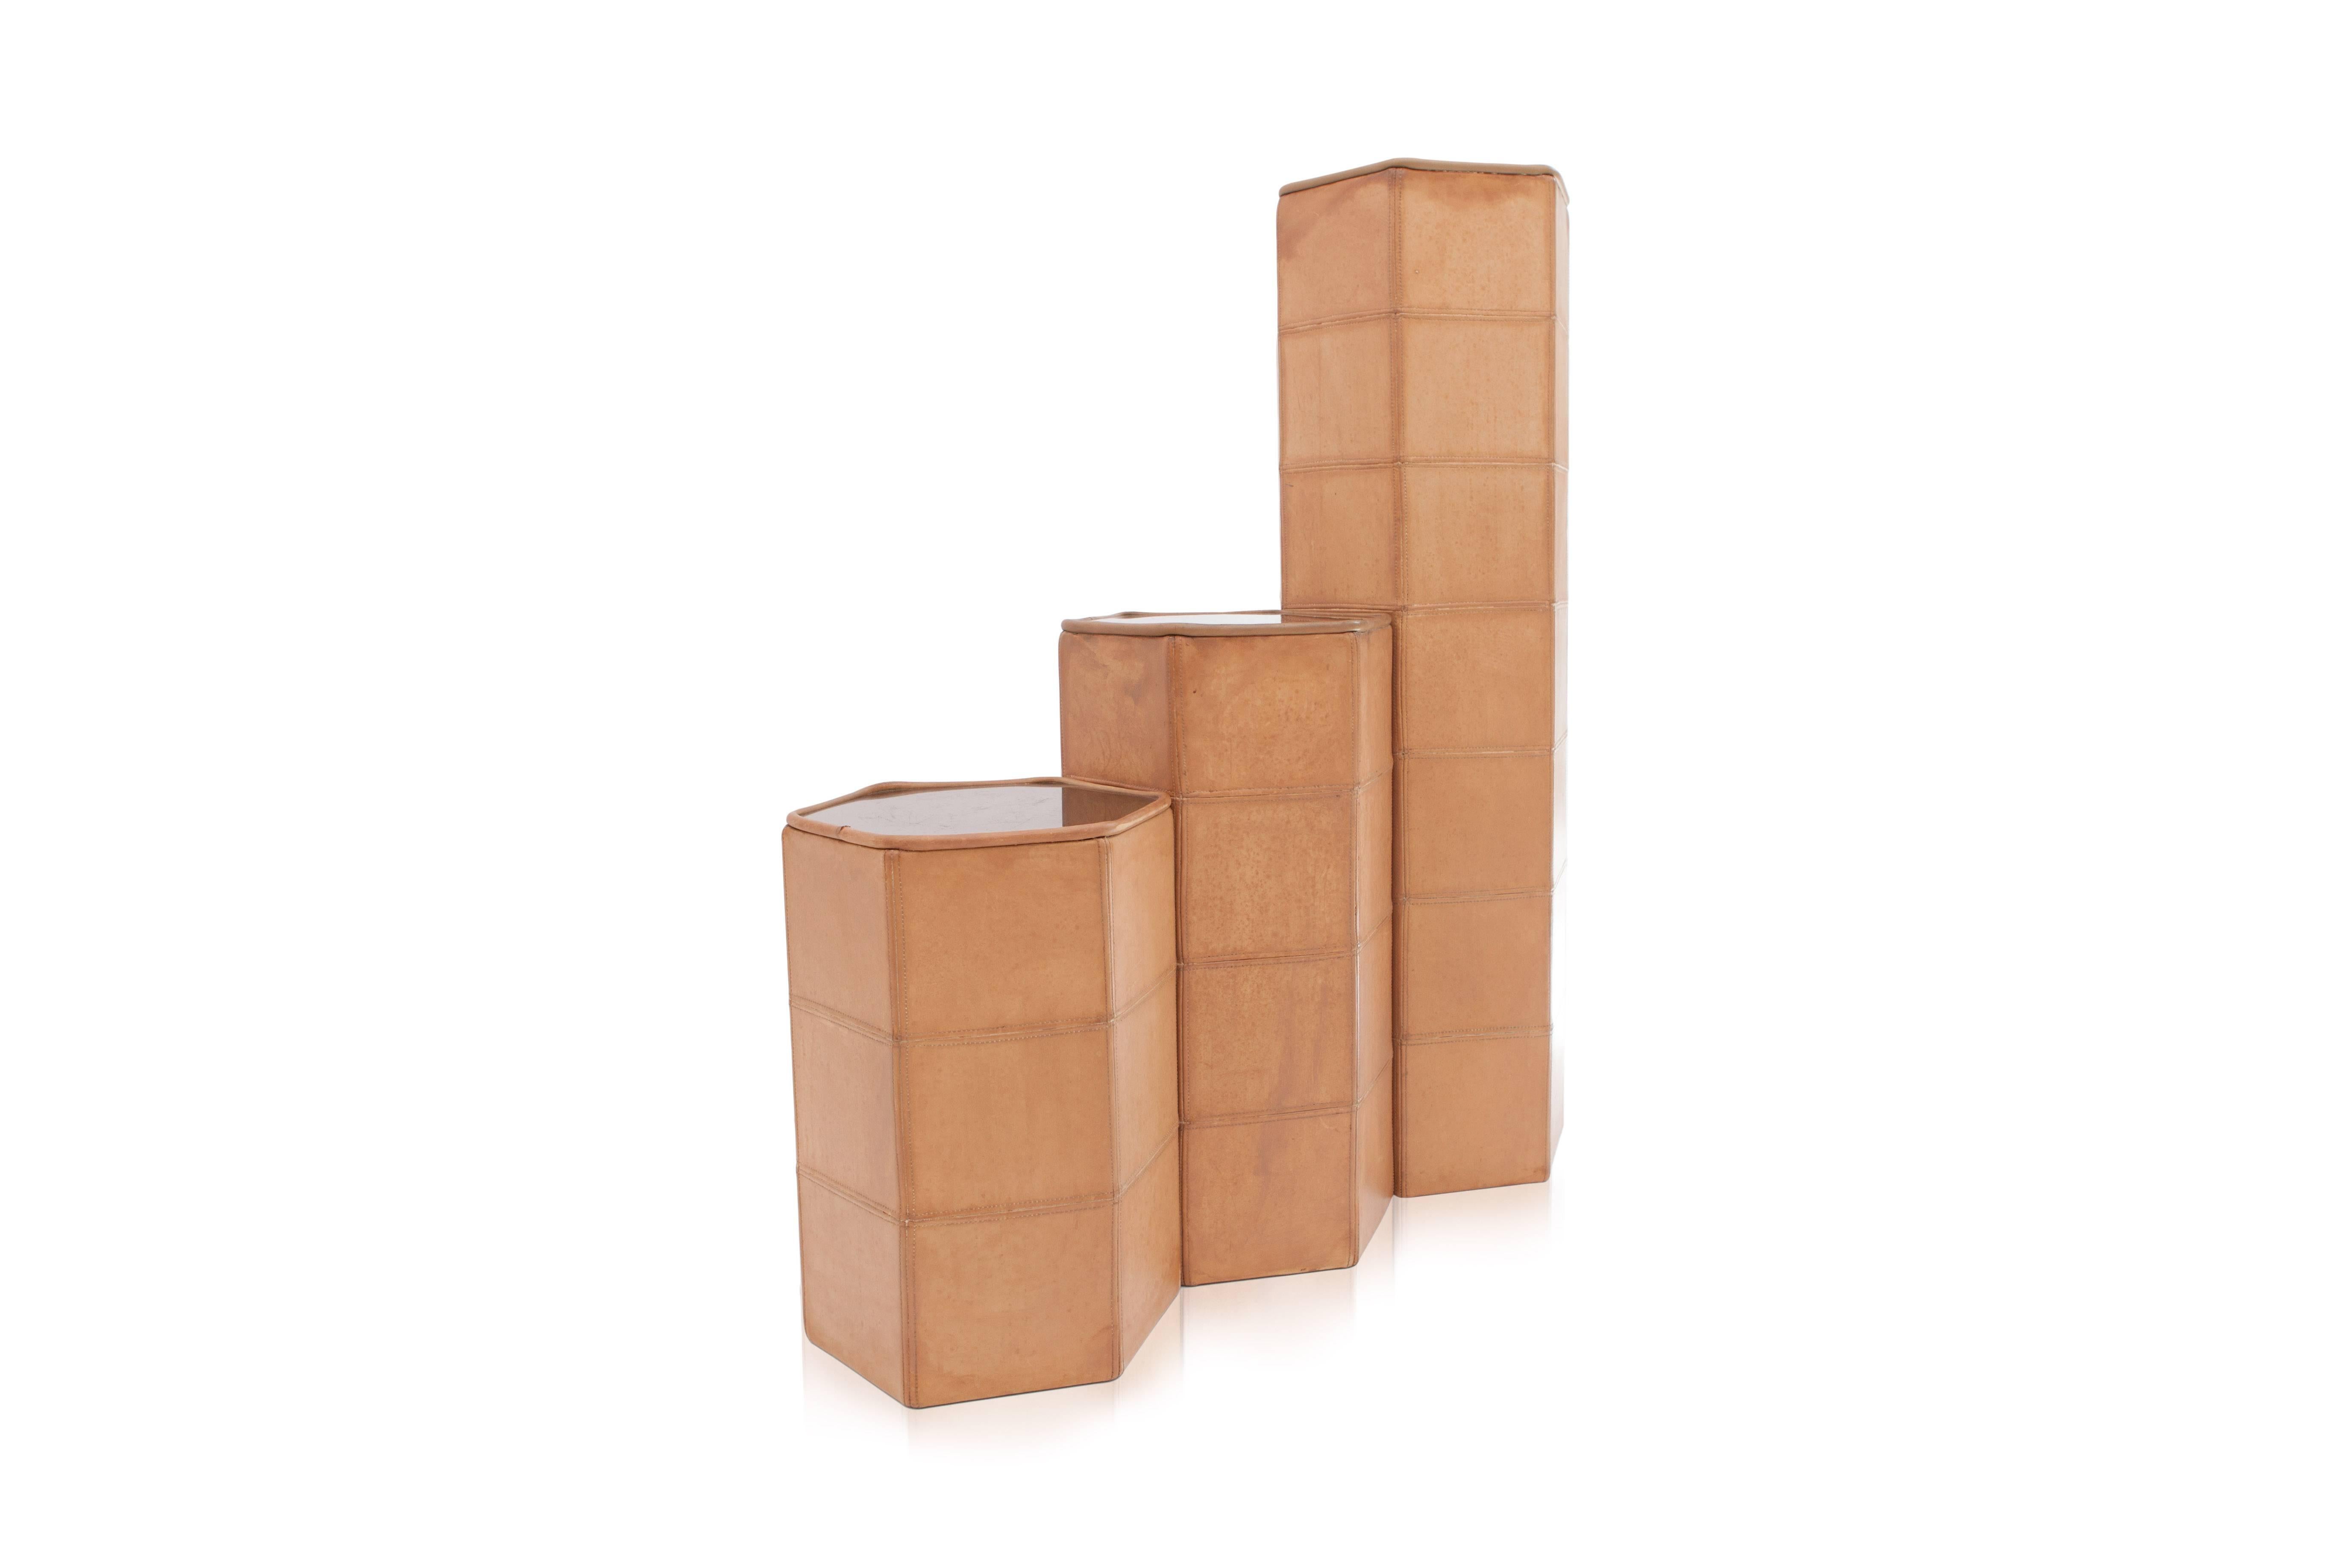 De Sede patchwork leather columns.
Set consisting of three columns in various heights.
Mirrored tops.
Switzerland, 1970s.
Measures: D 30 cm x W 33 cm x H 46-61-107 cm.